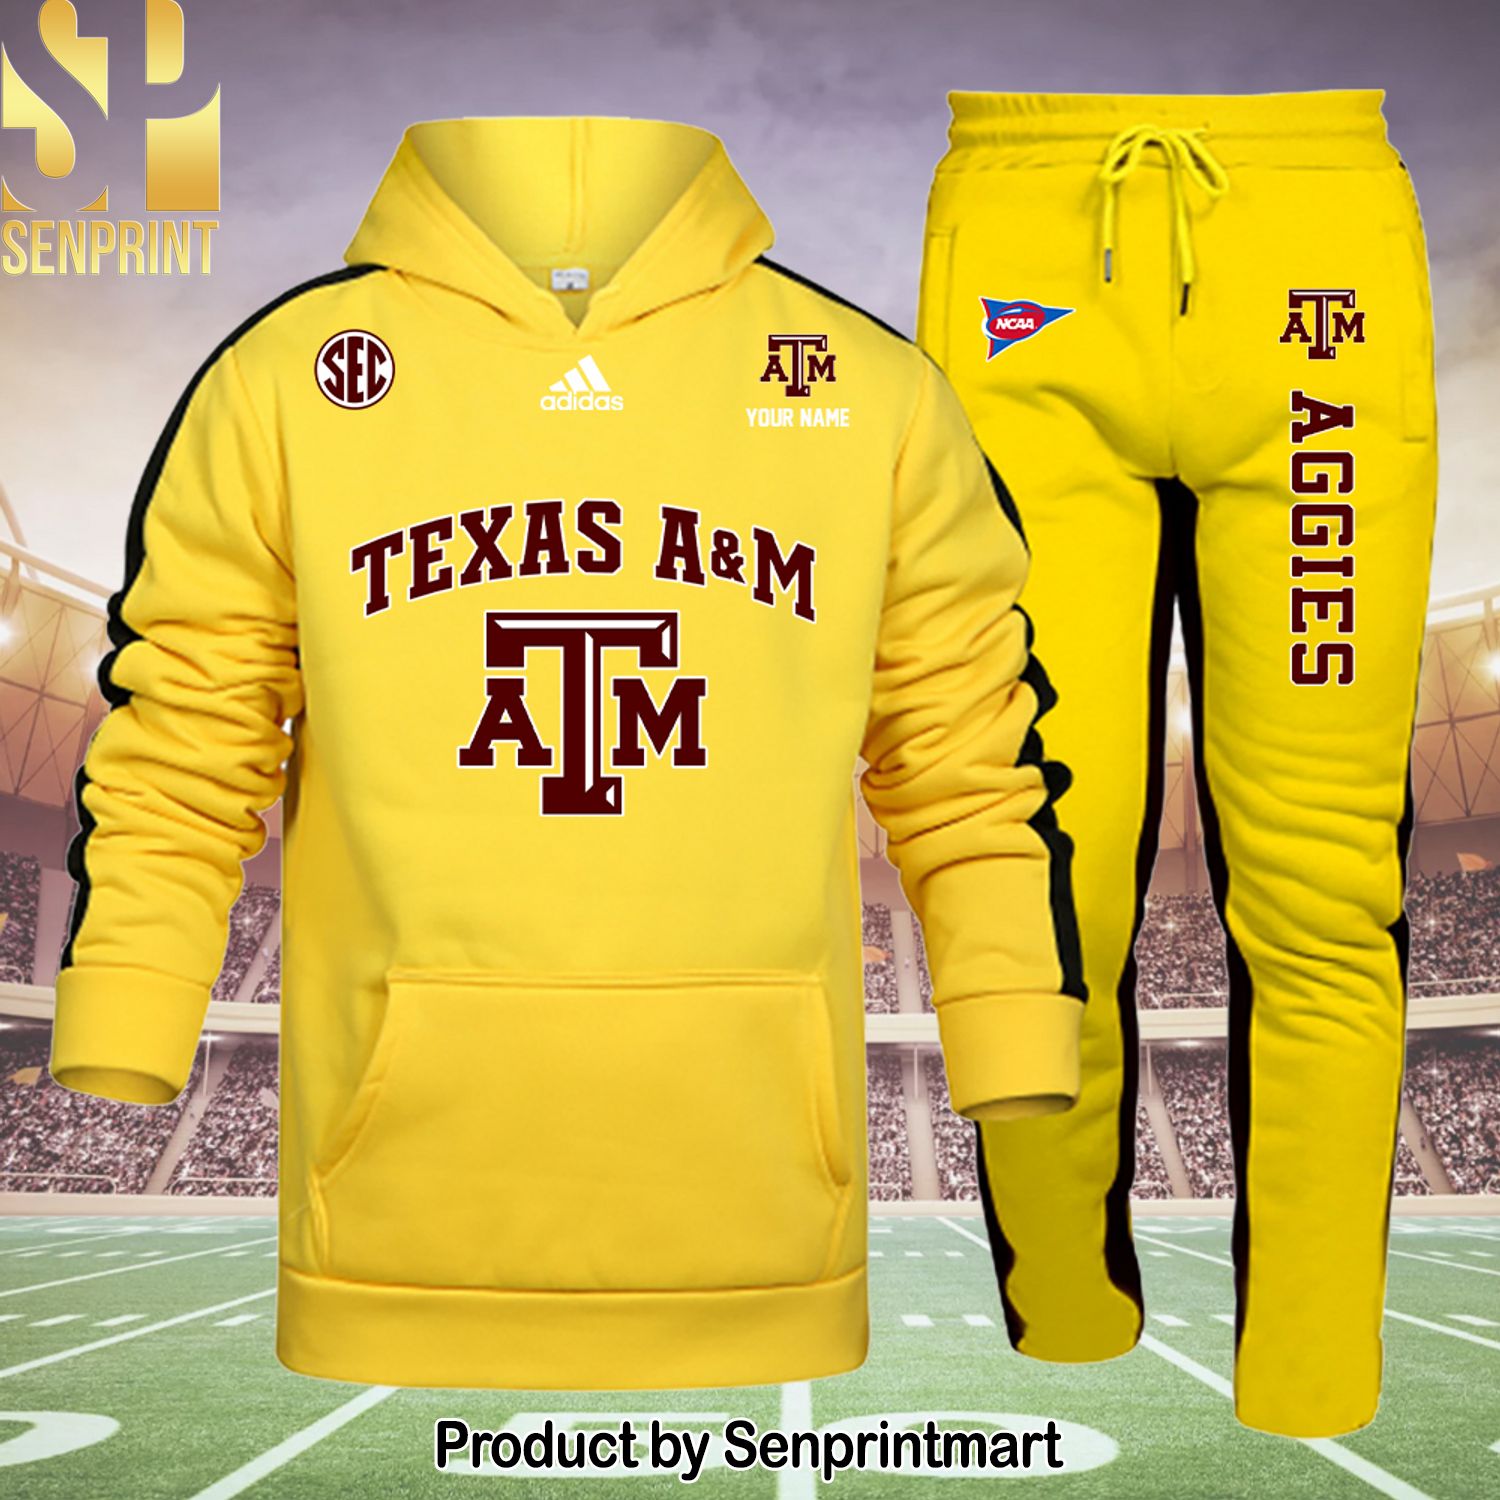 Texas A&M Aggies New Style Full Print Shirt and Pants